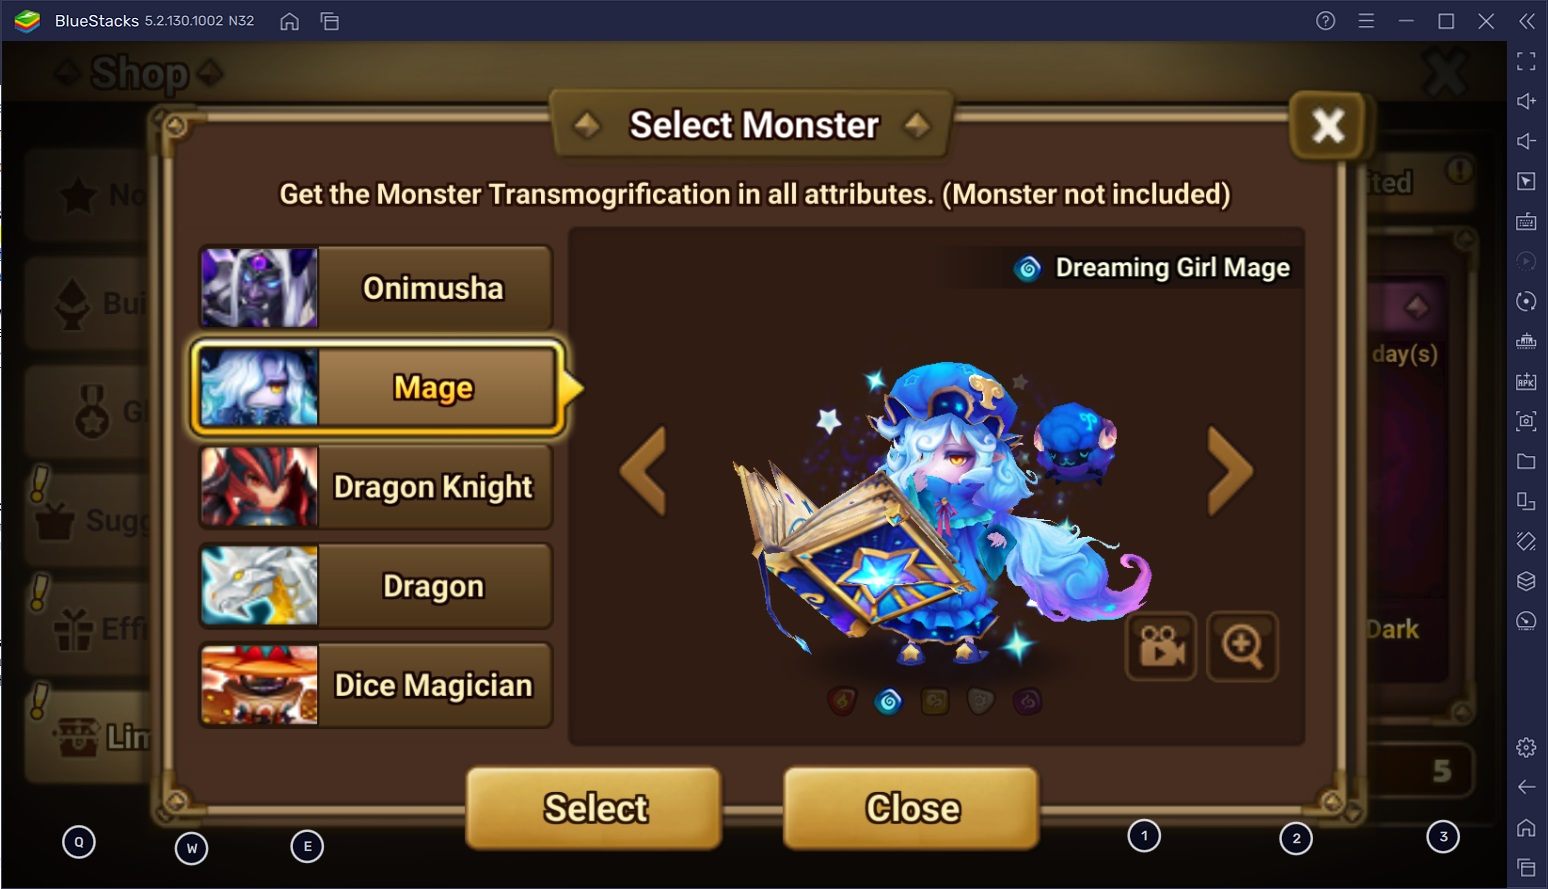 Summoners War Version 6.5.3 is Adding 5 New Monster Skins